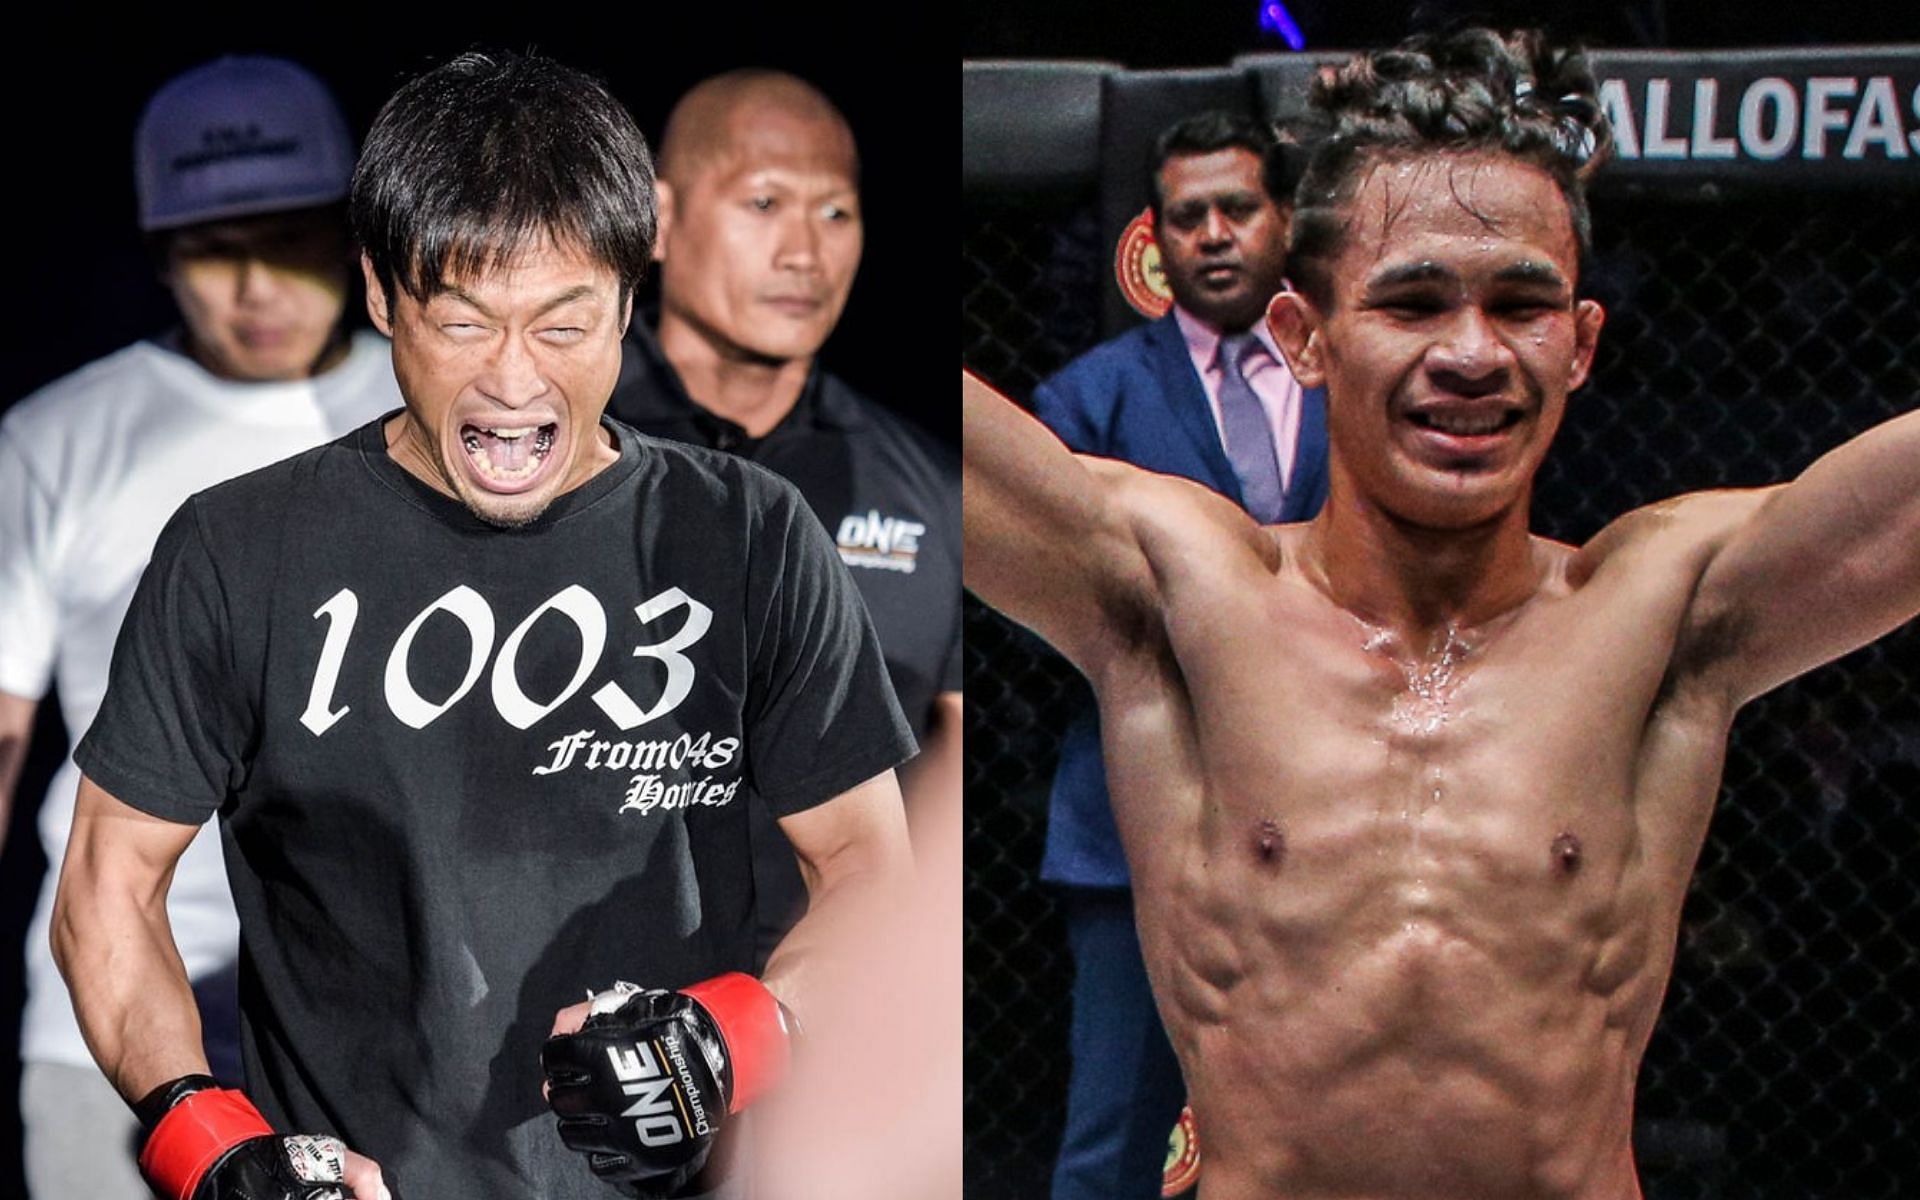 Jeremy Miado sees his advantages over Senzo Ikeda in their upcoming bout | Photo: ONE Championship